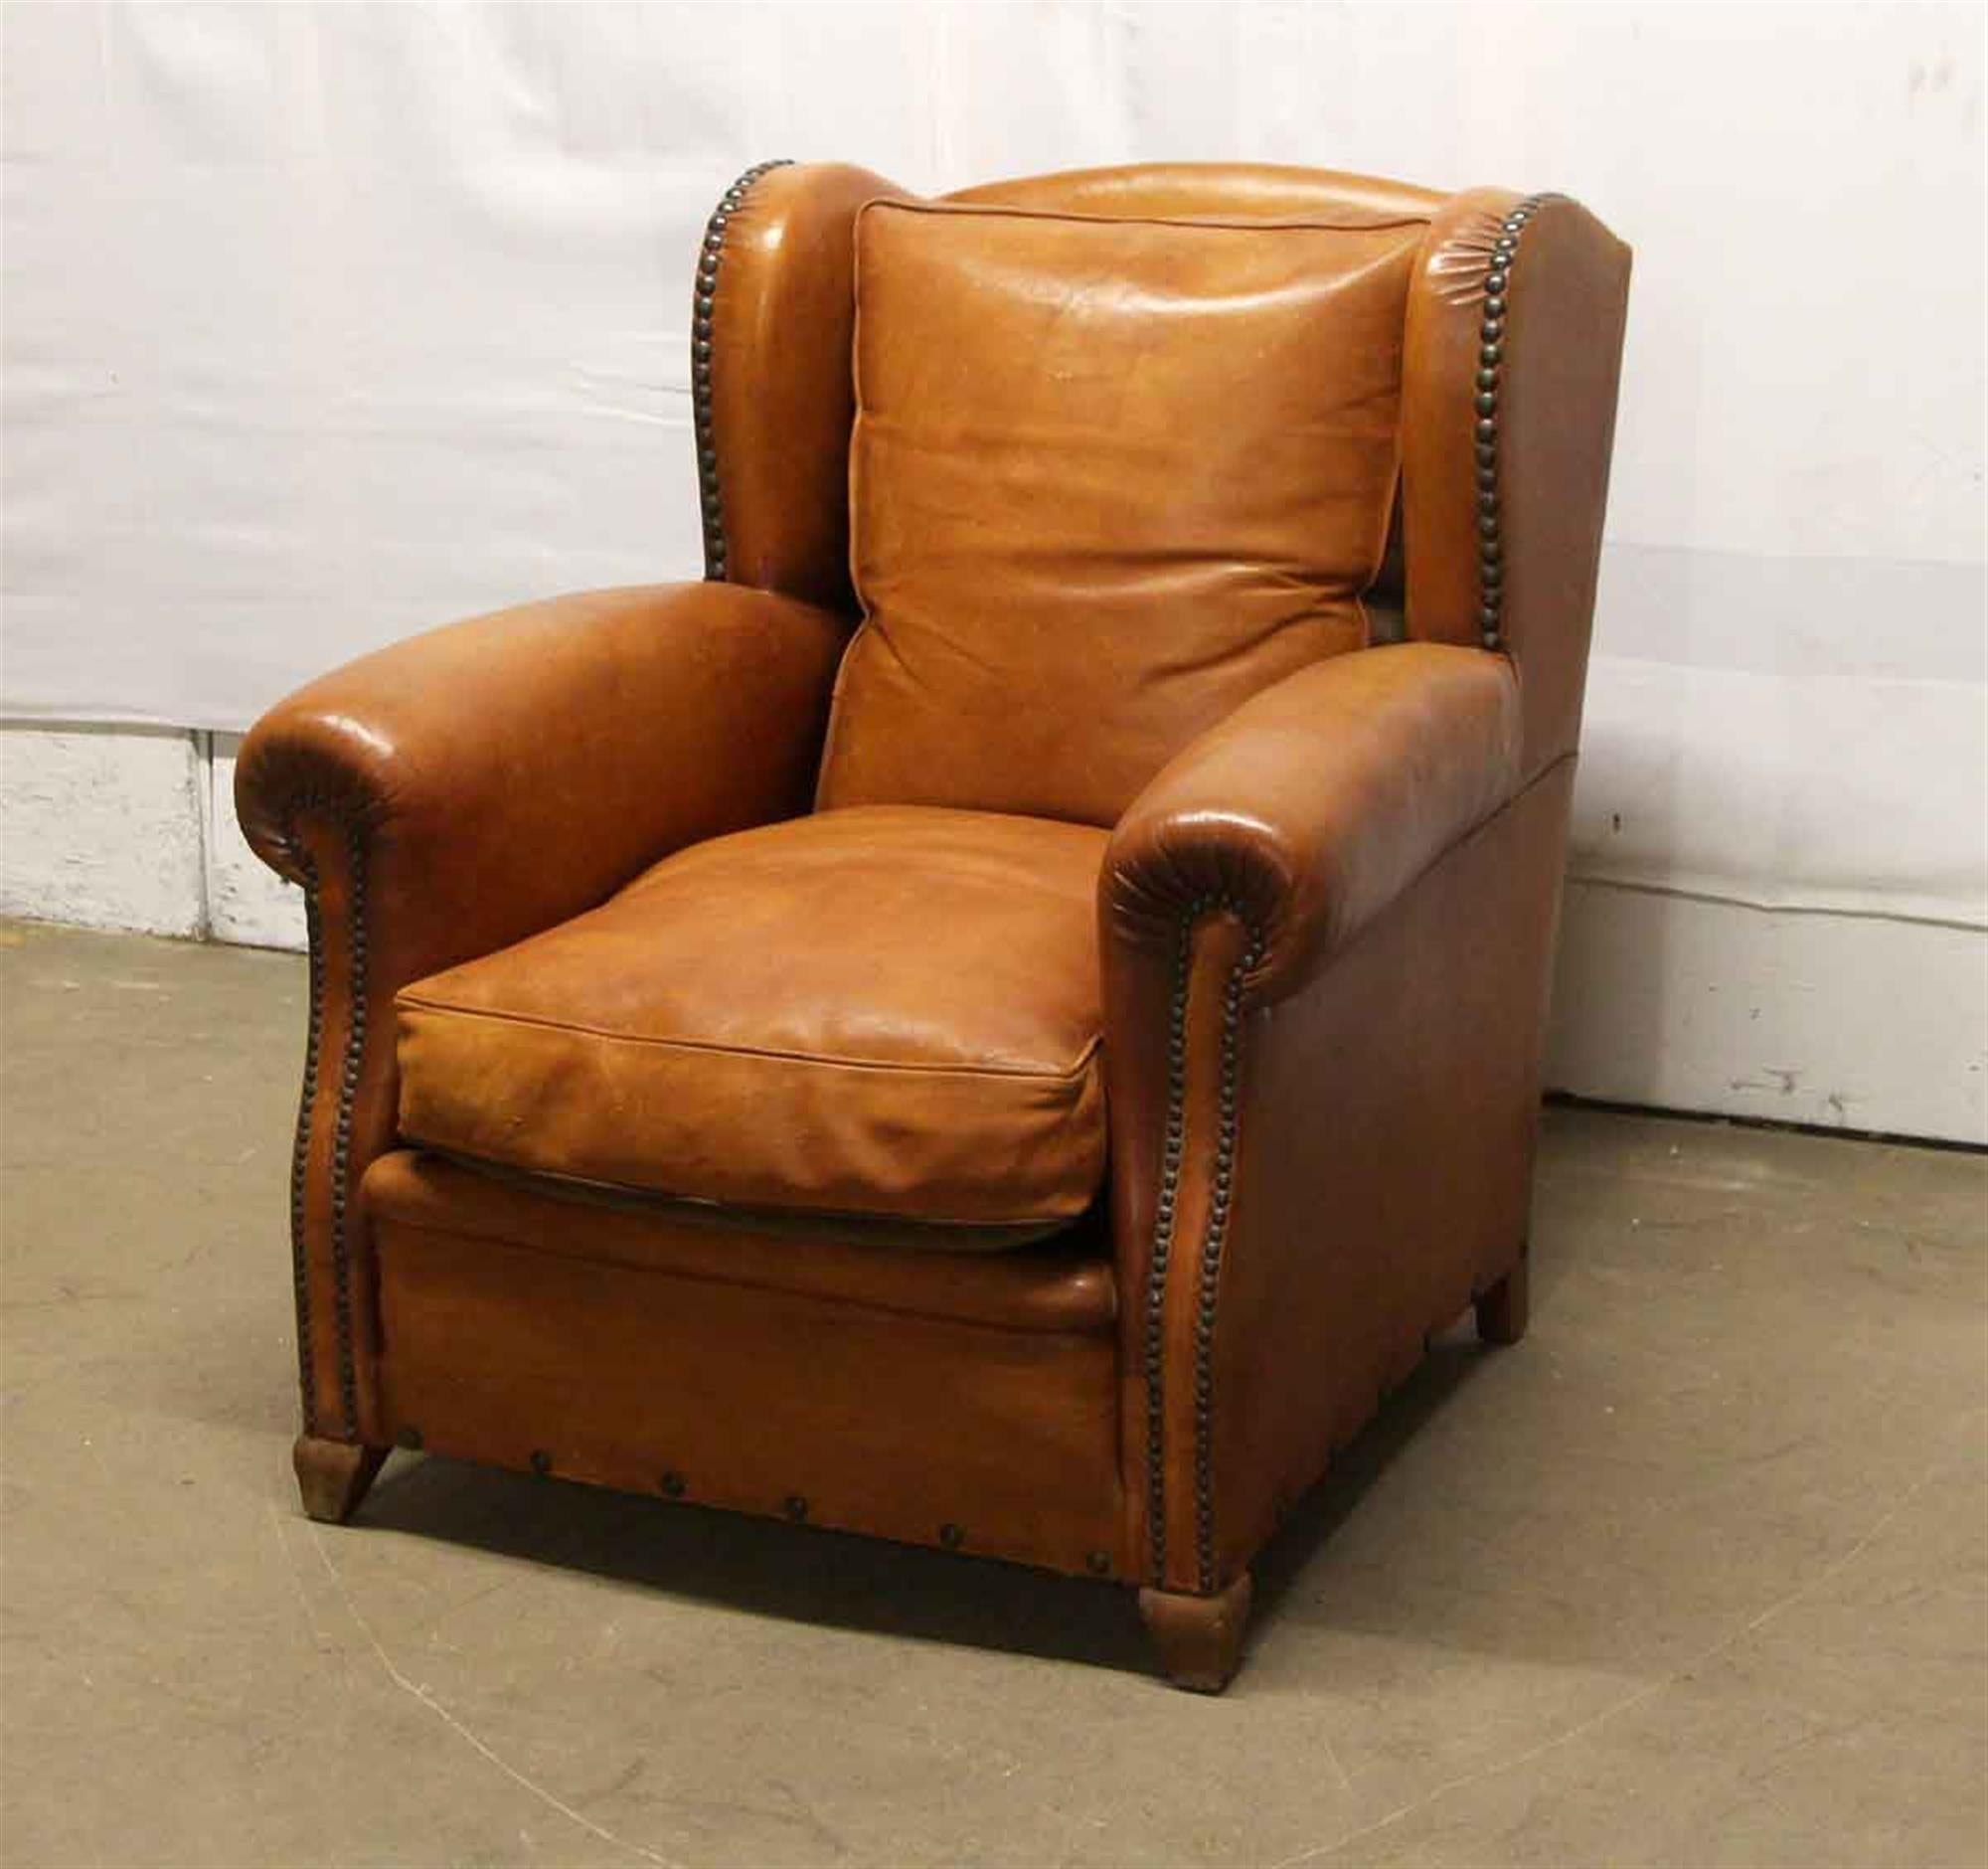 1980s French bergère leather brown club chair with studded details. This can be seen at our 302 bowery location in Manhattan.